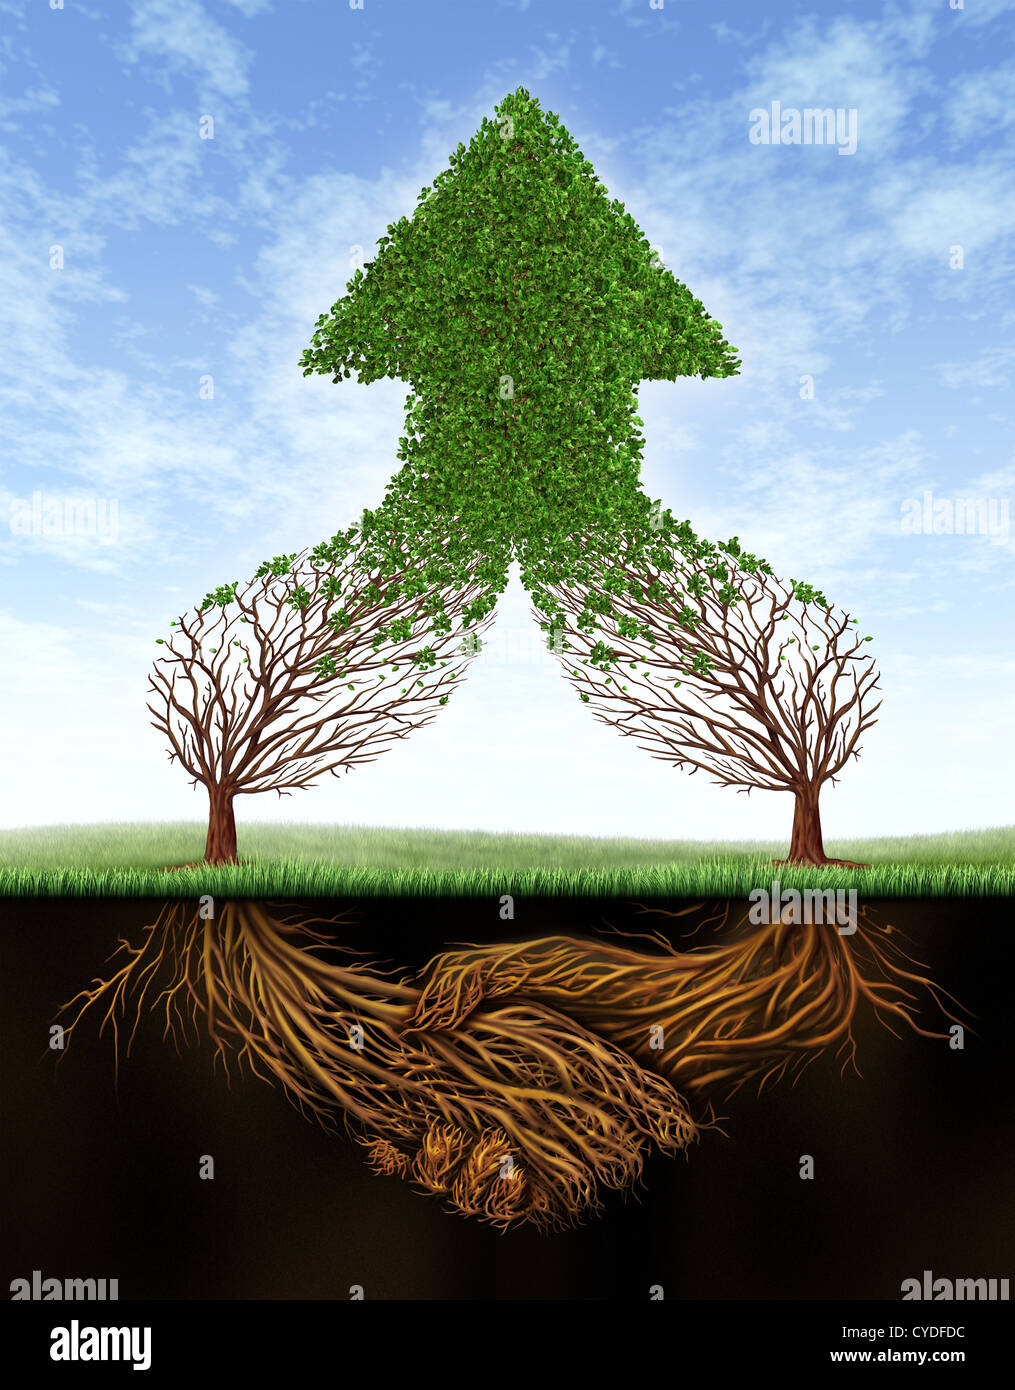 Business deal growth and team partnership with the roots of two trees in the shape of a human hand shake and the empty branches Stock Photo